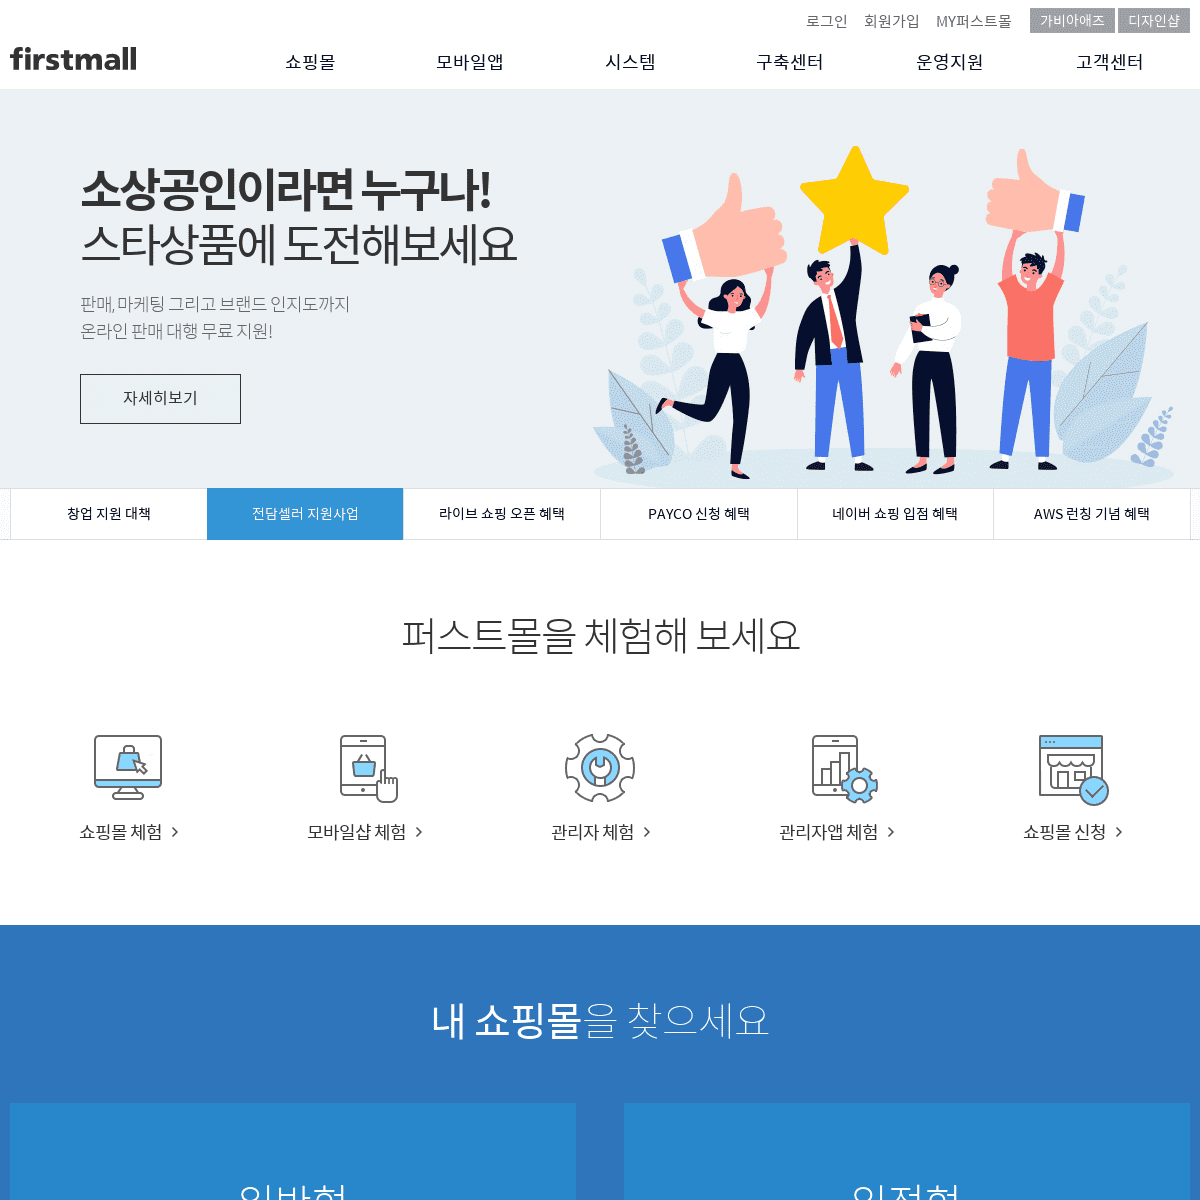 A complete backup of https://firstmall.kr